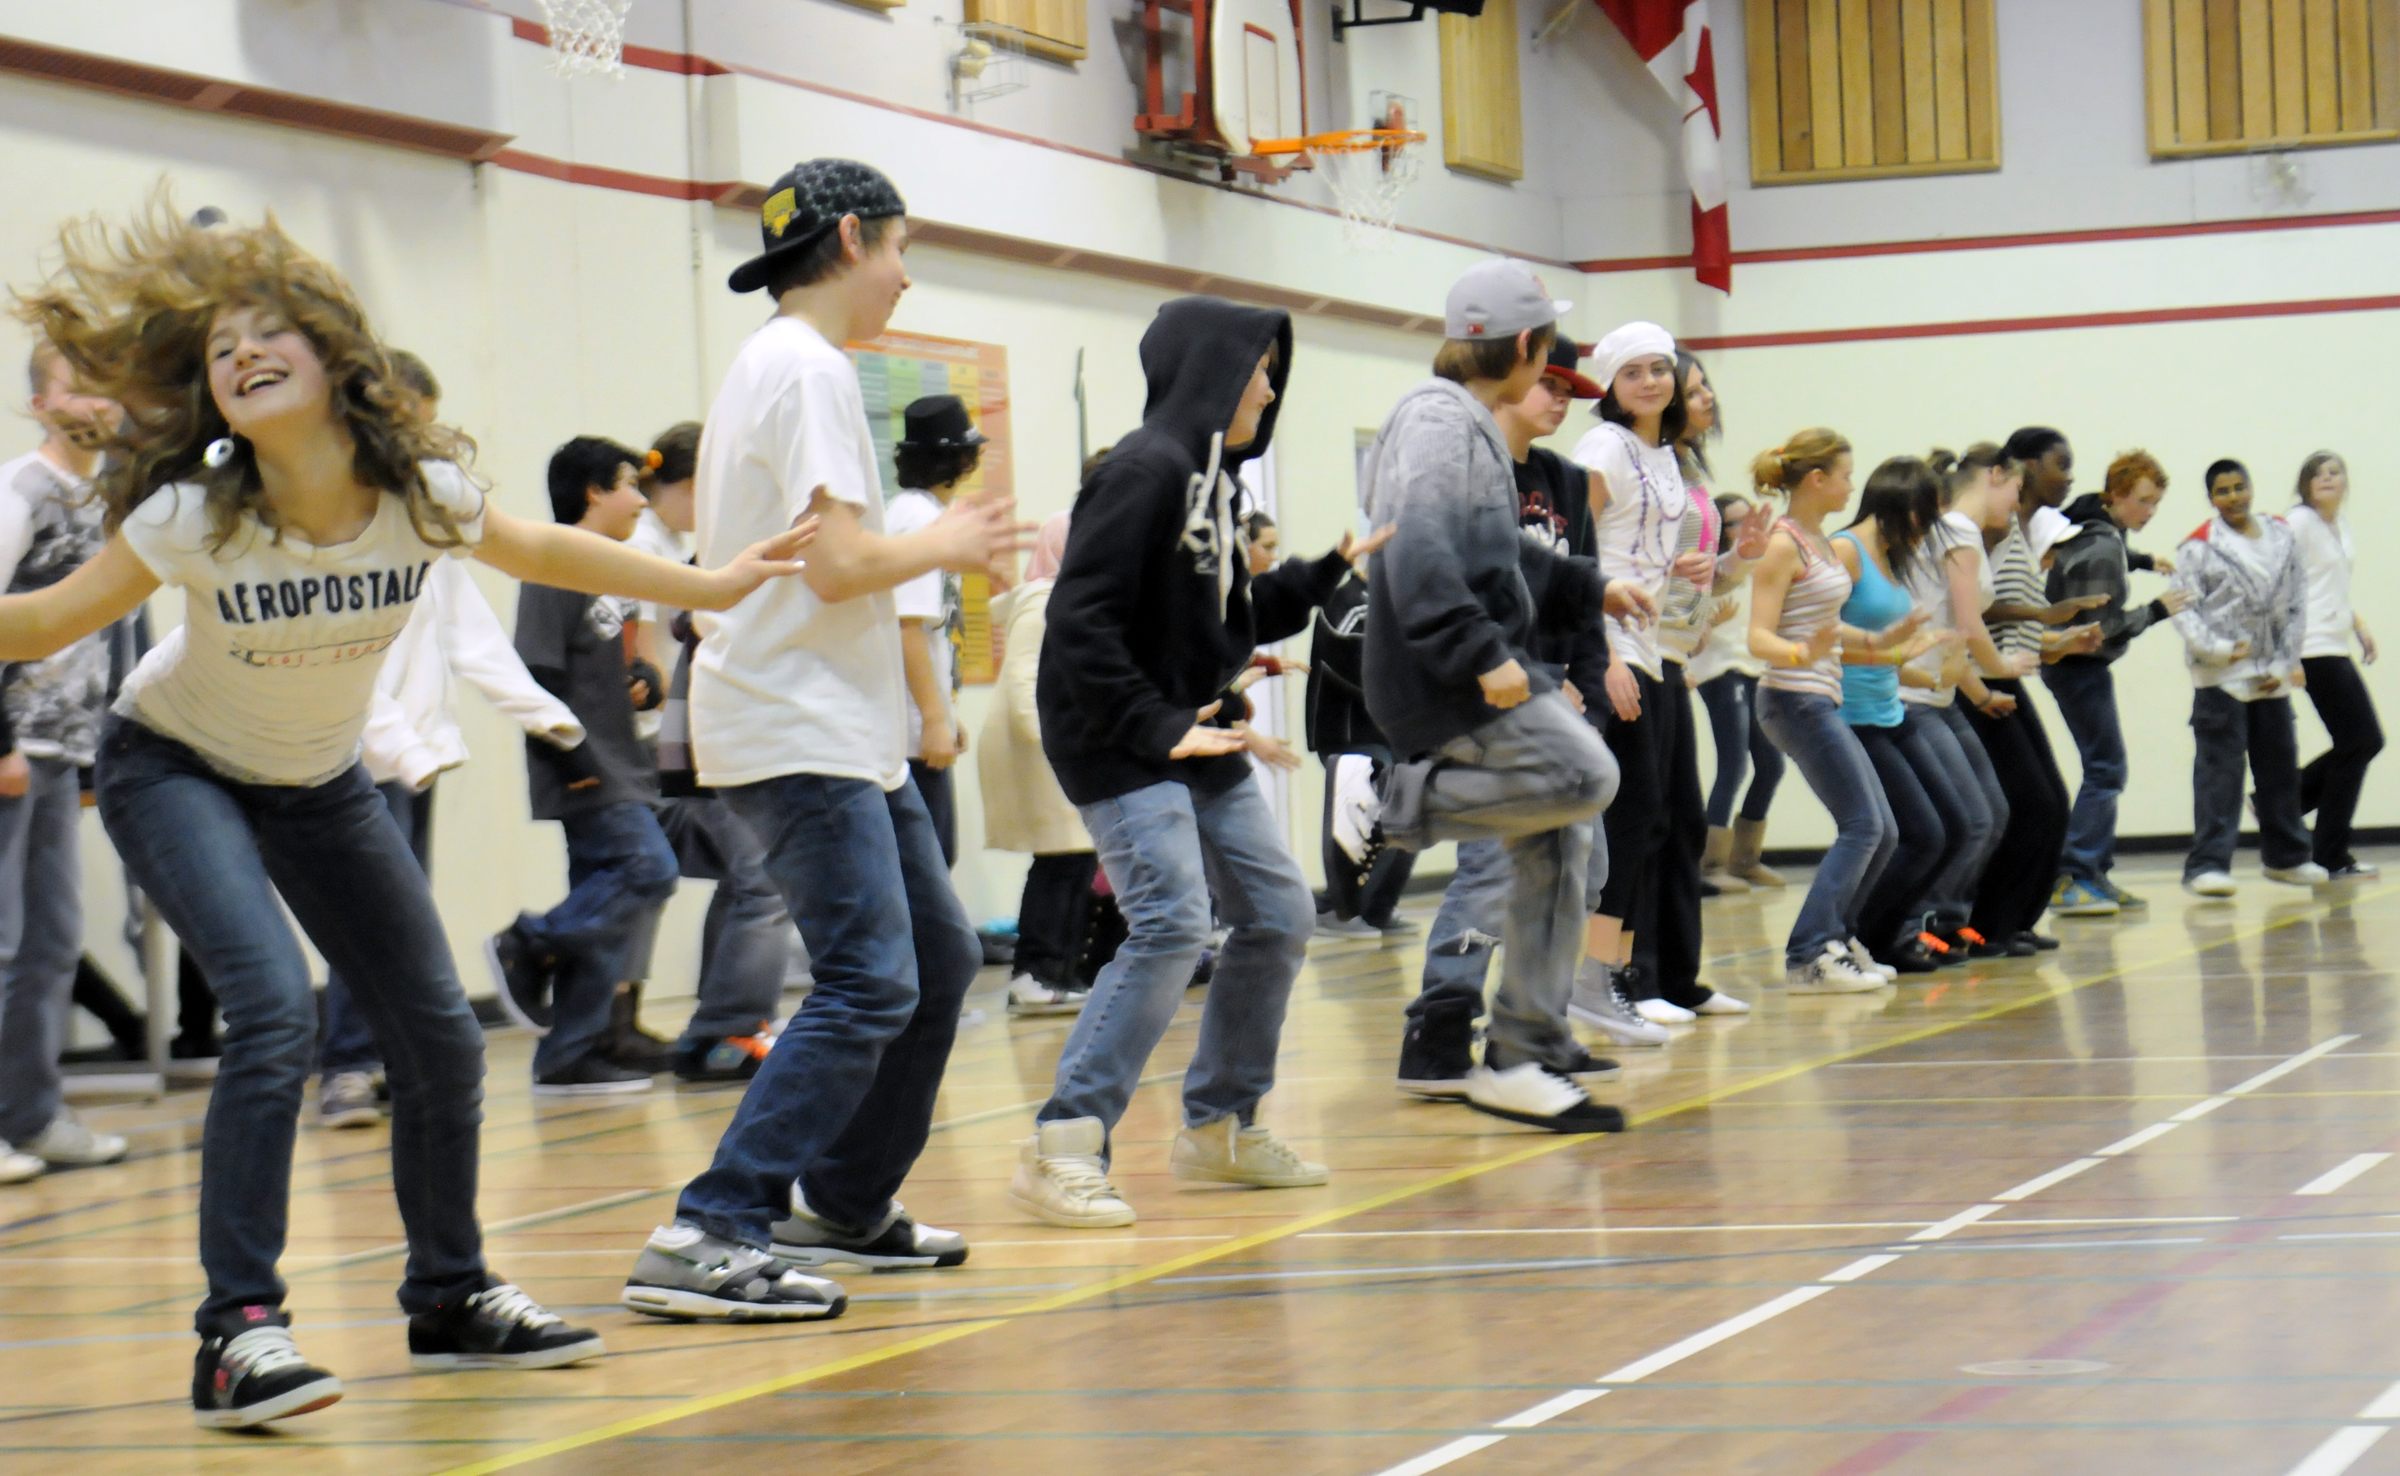 STRUTTING- Students at Central Middle School in Red Deer from grades six to eight got the opportunity to show off their hip hop moves they had been learning all week from 3rd Street Beat Entertainment out of Edmonton on Friday afternoon.